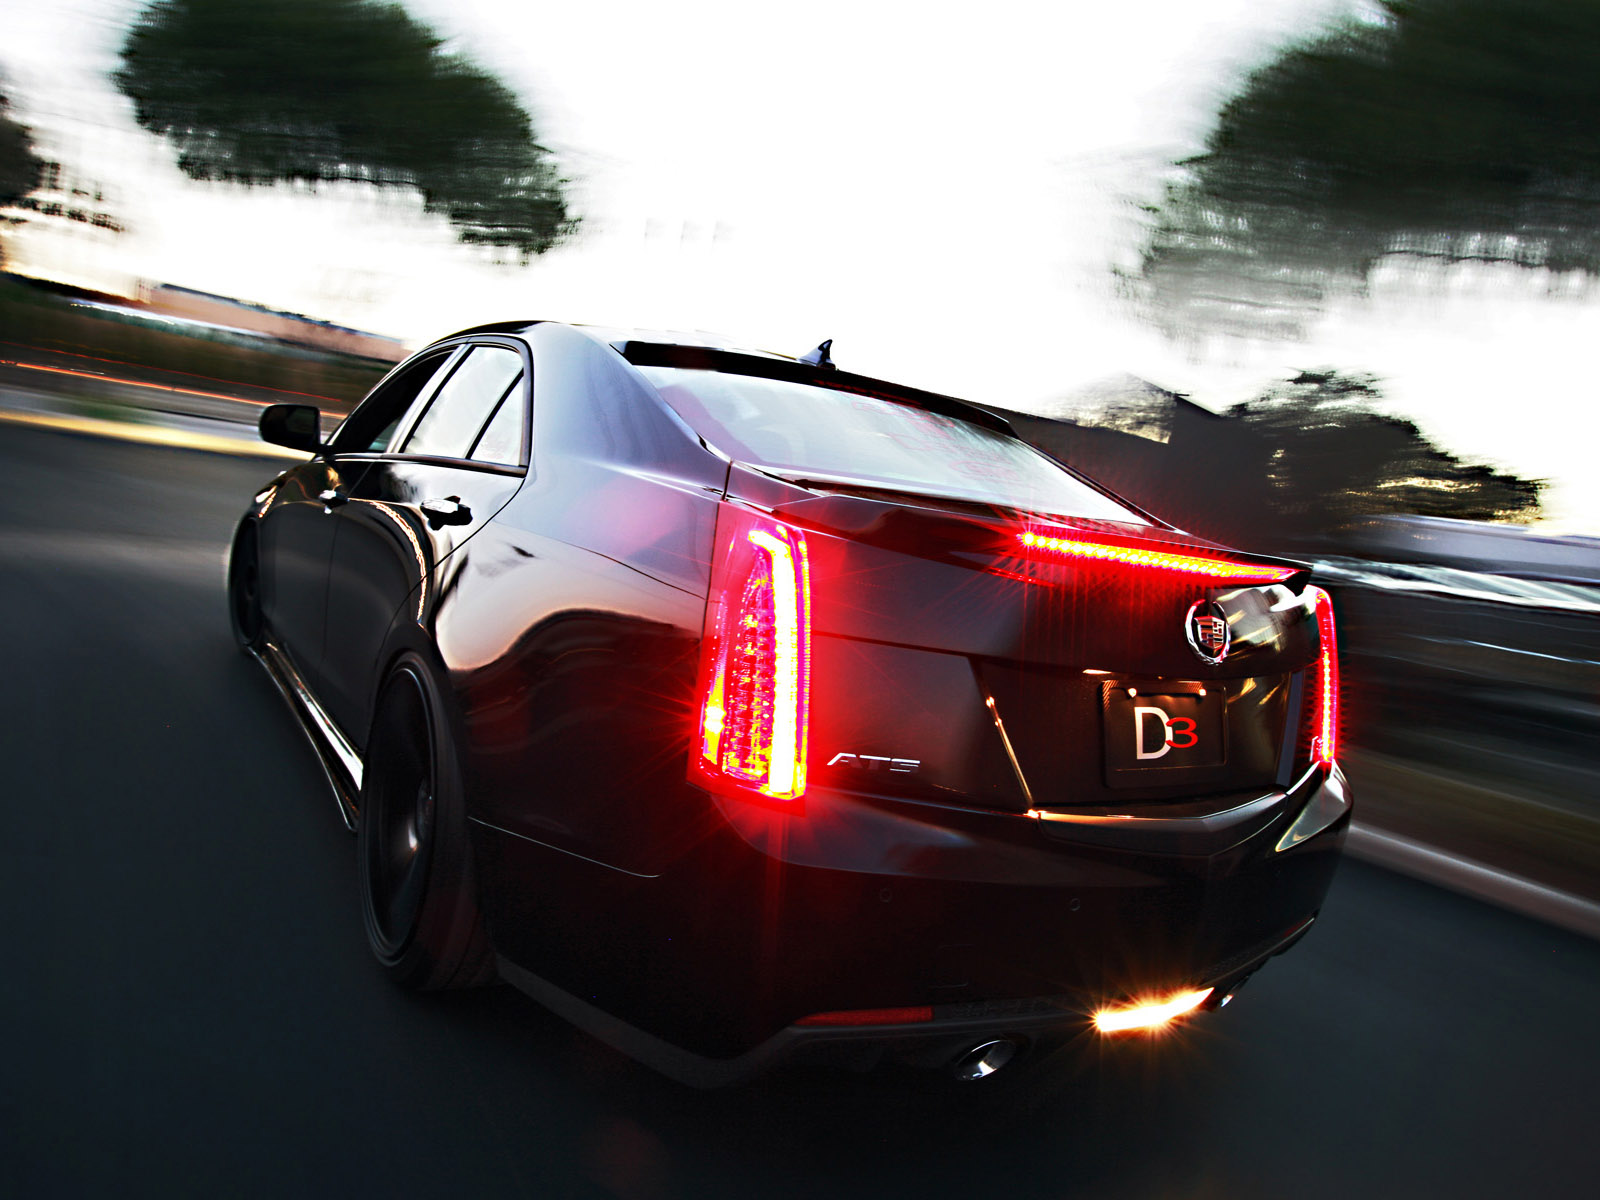 2012, Cadillac, Ats, D3, Tuning, Muscle, Luxury Wallpaper